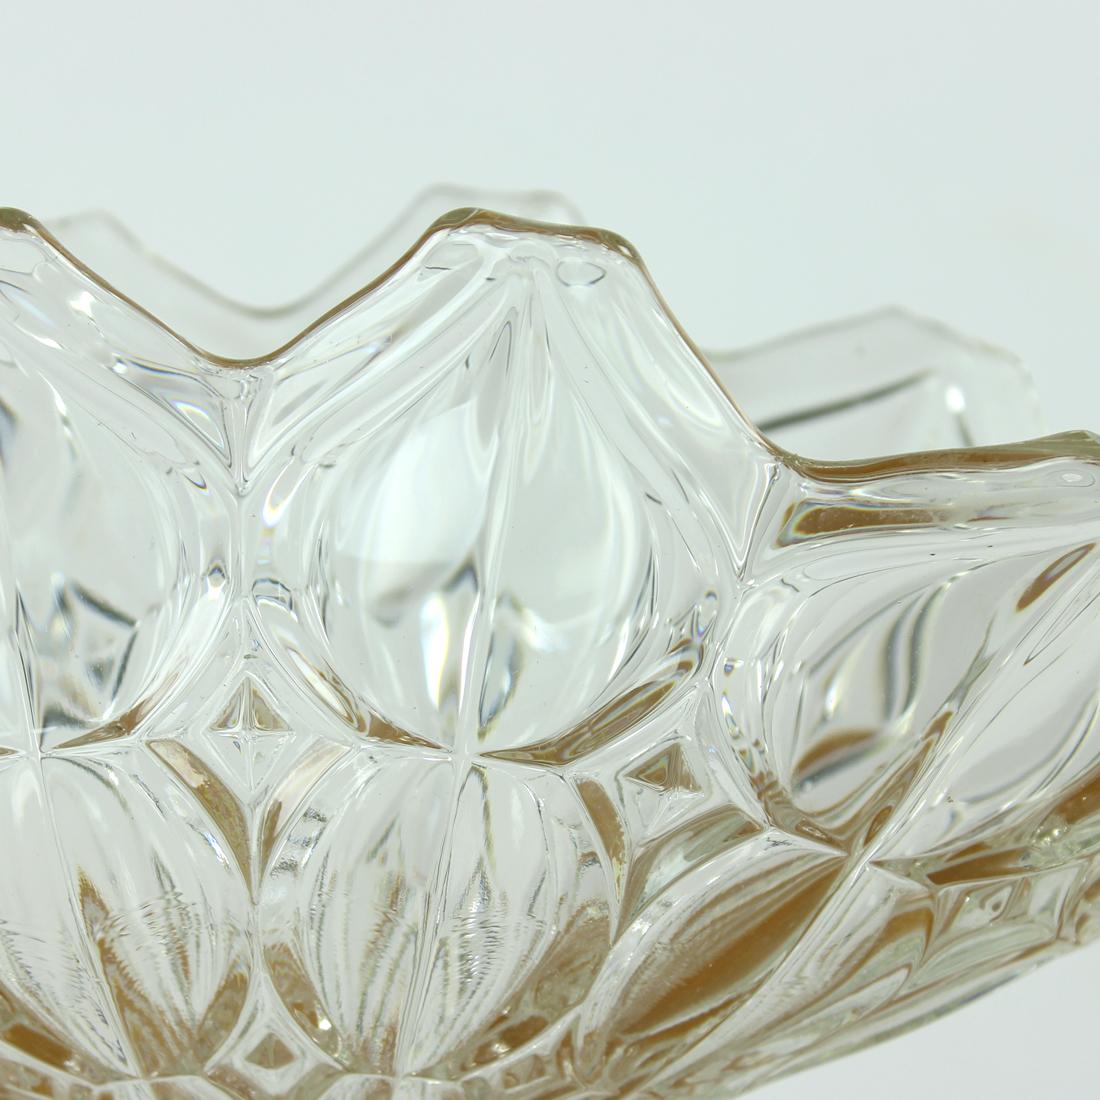 Mid-20th Century Large Pressed Glass Bowl, Tulip Collection Hermanowa Hut, 1957 For Sale